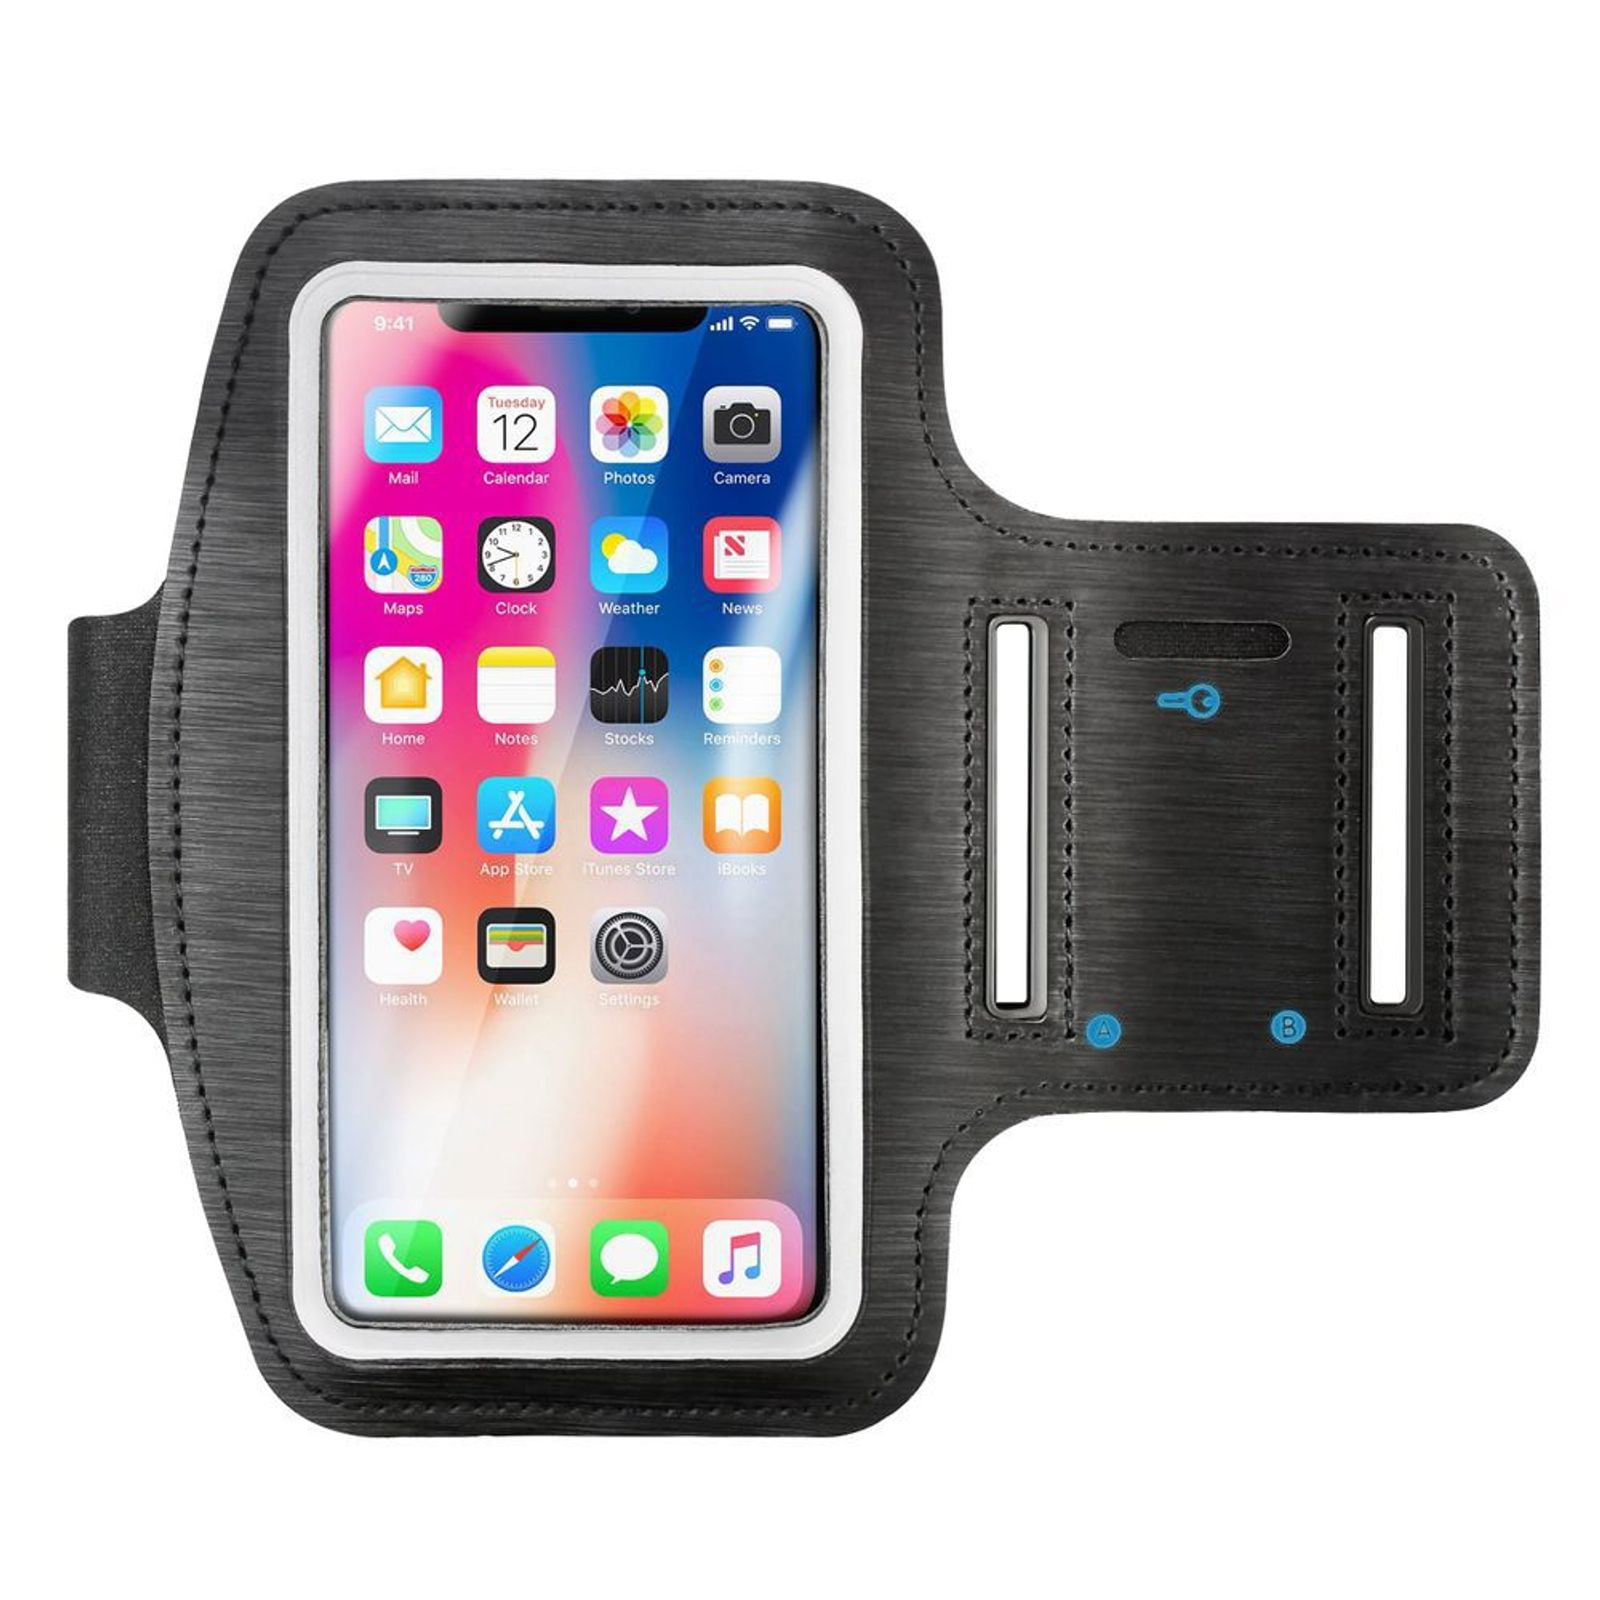 Water Resistant Sports Armband Key Holder IPhone 6 6S Plus Galaxy S6 S5 Red